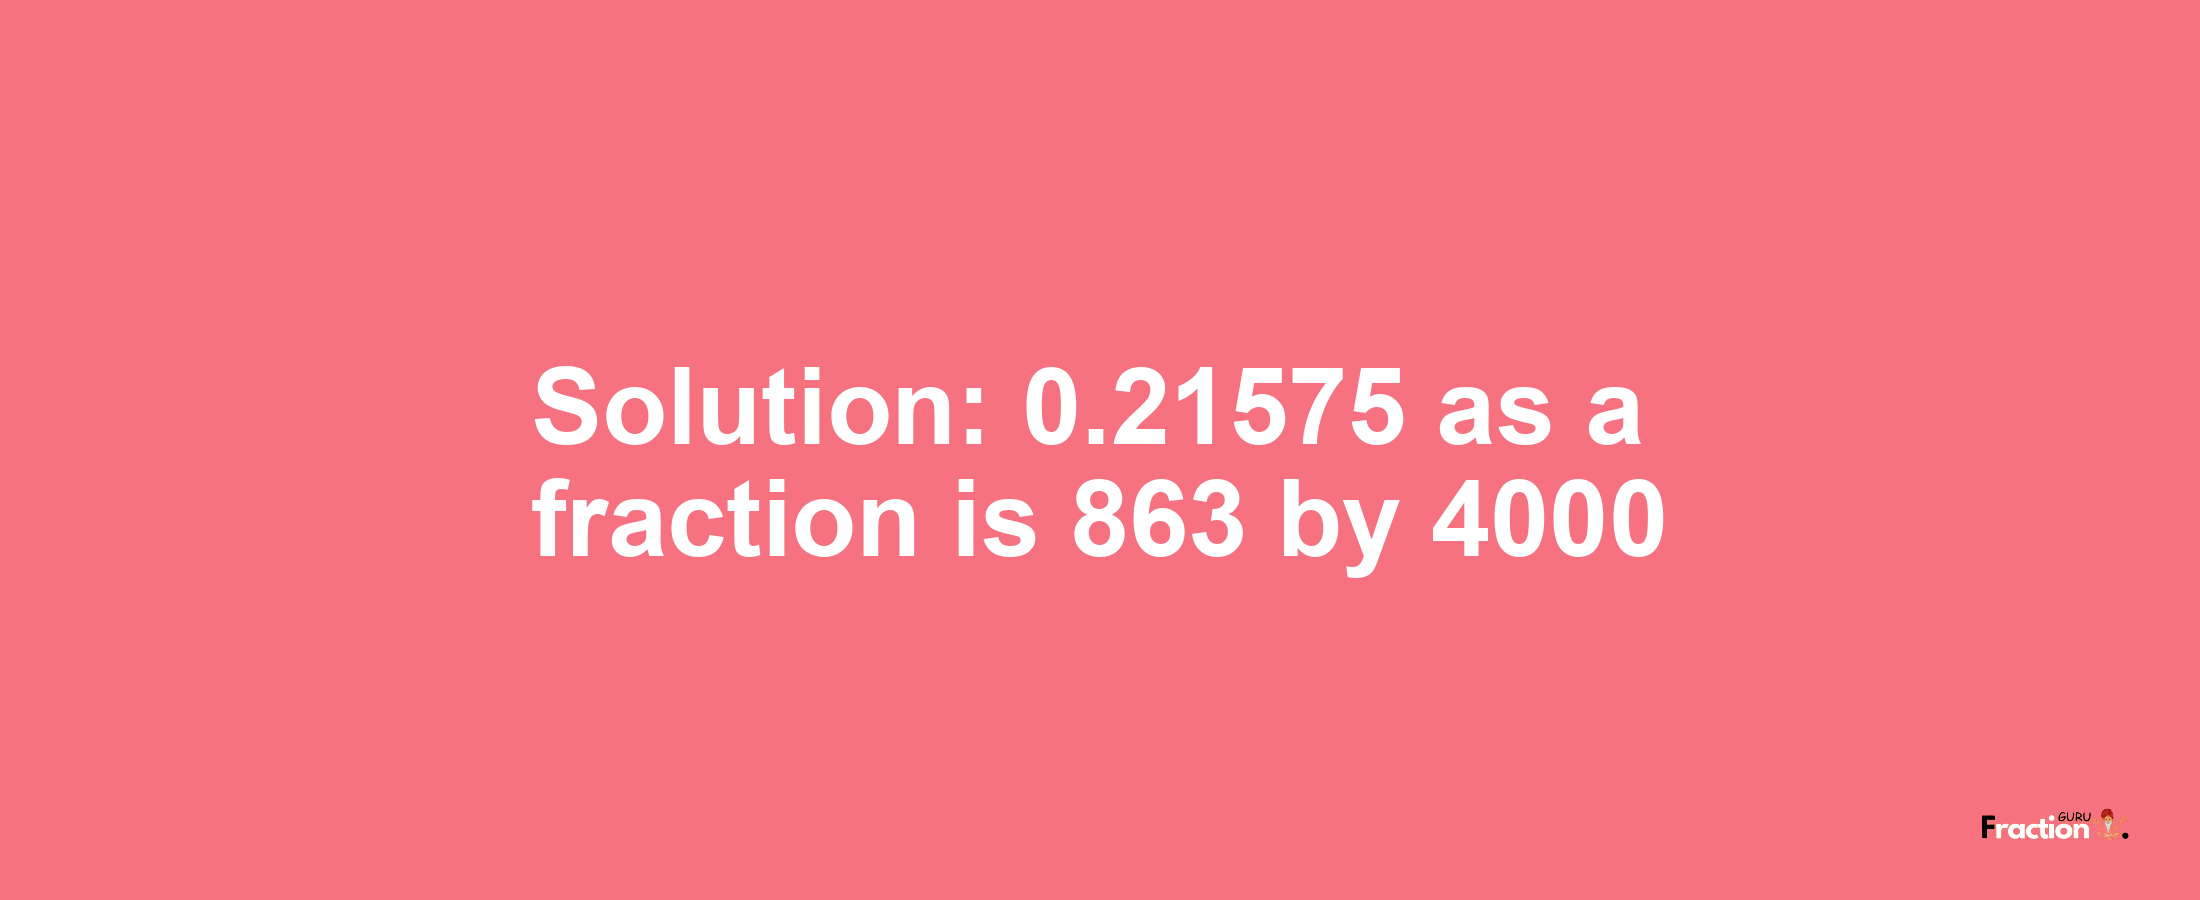 Solution:0.21575 as a fraction is 863/4000